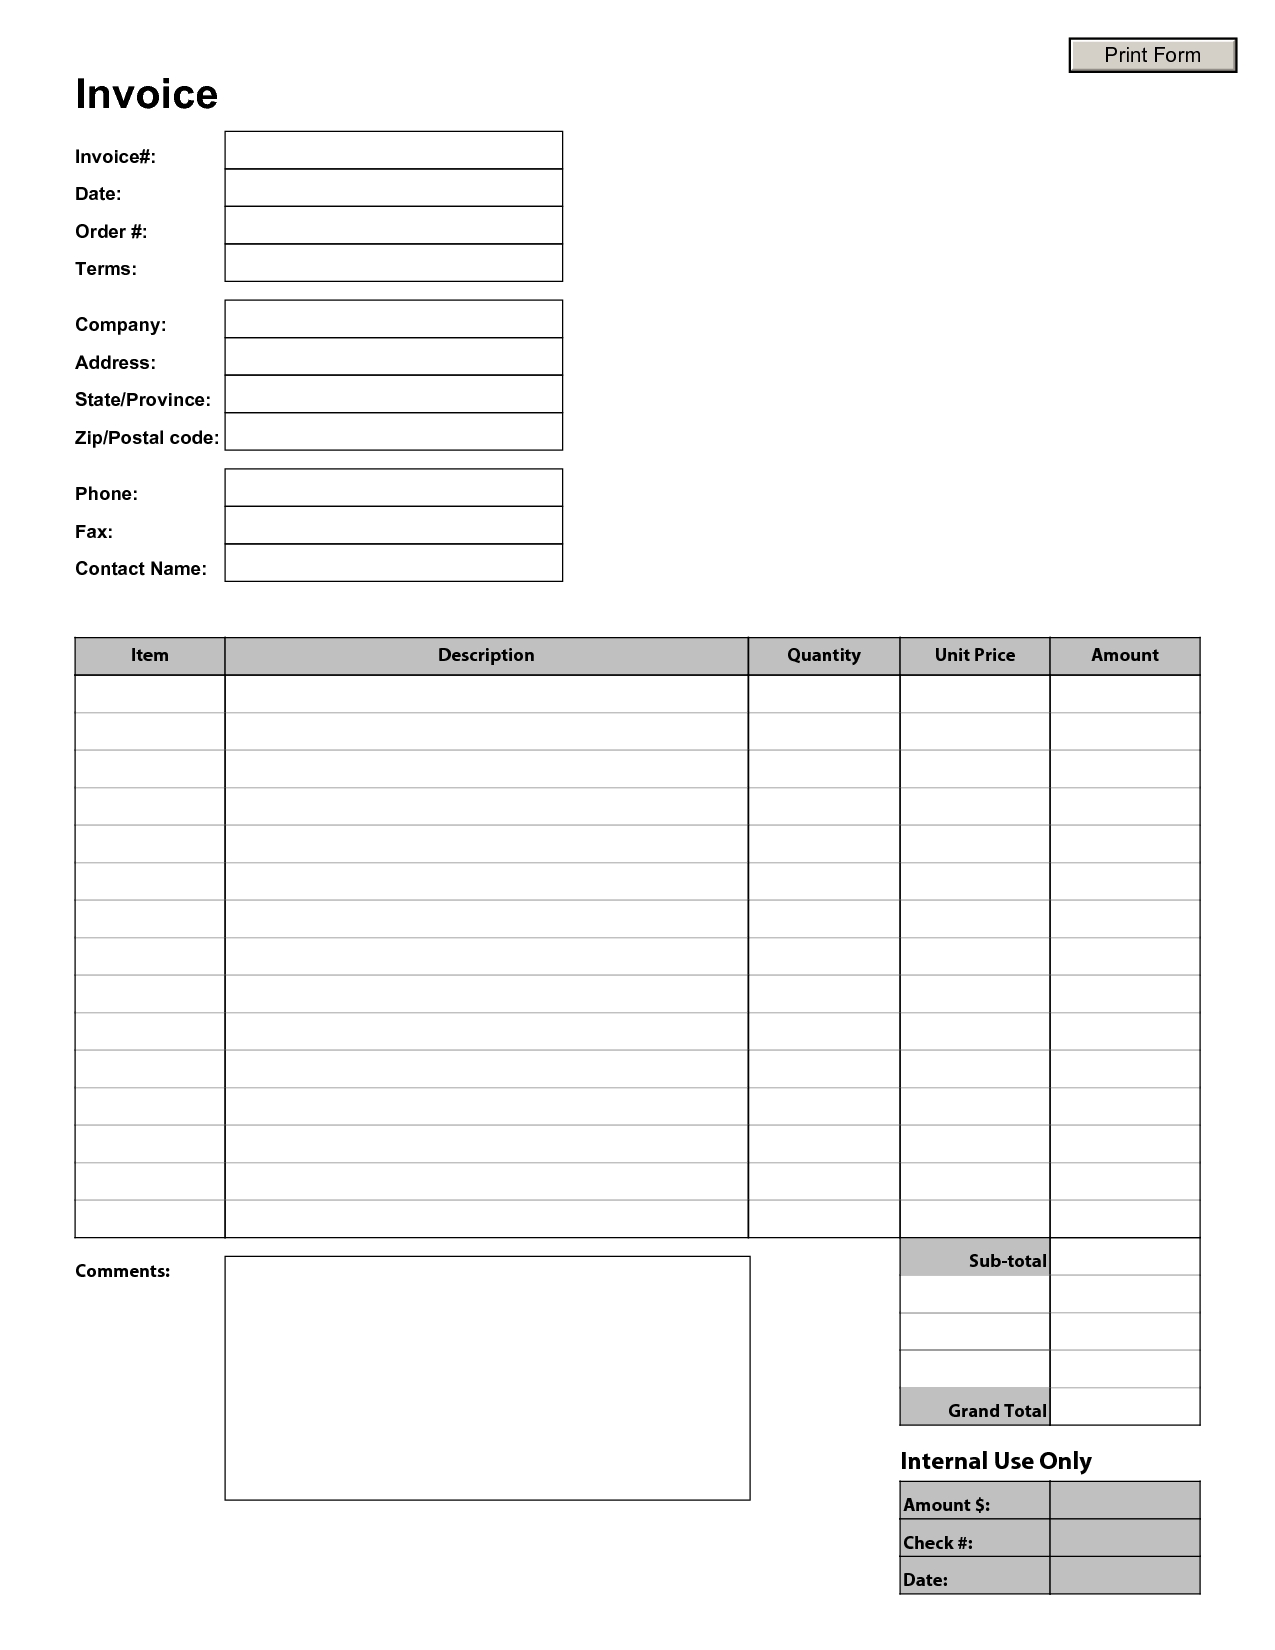 blank invoice template blank invoice arsenal printable fill in blank printable invoice